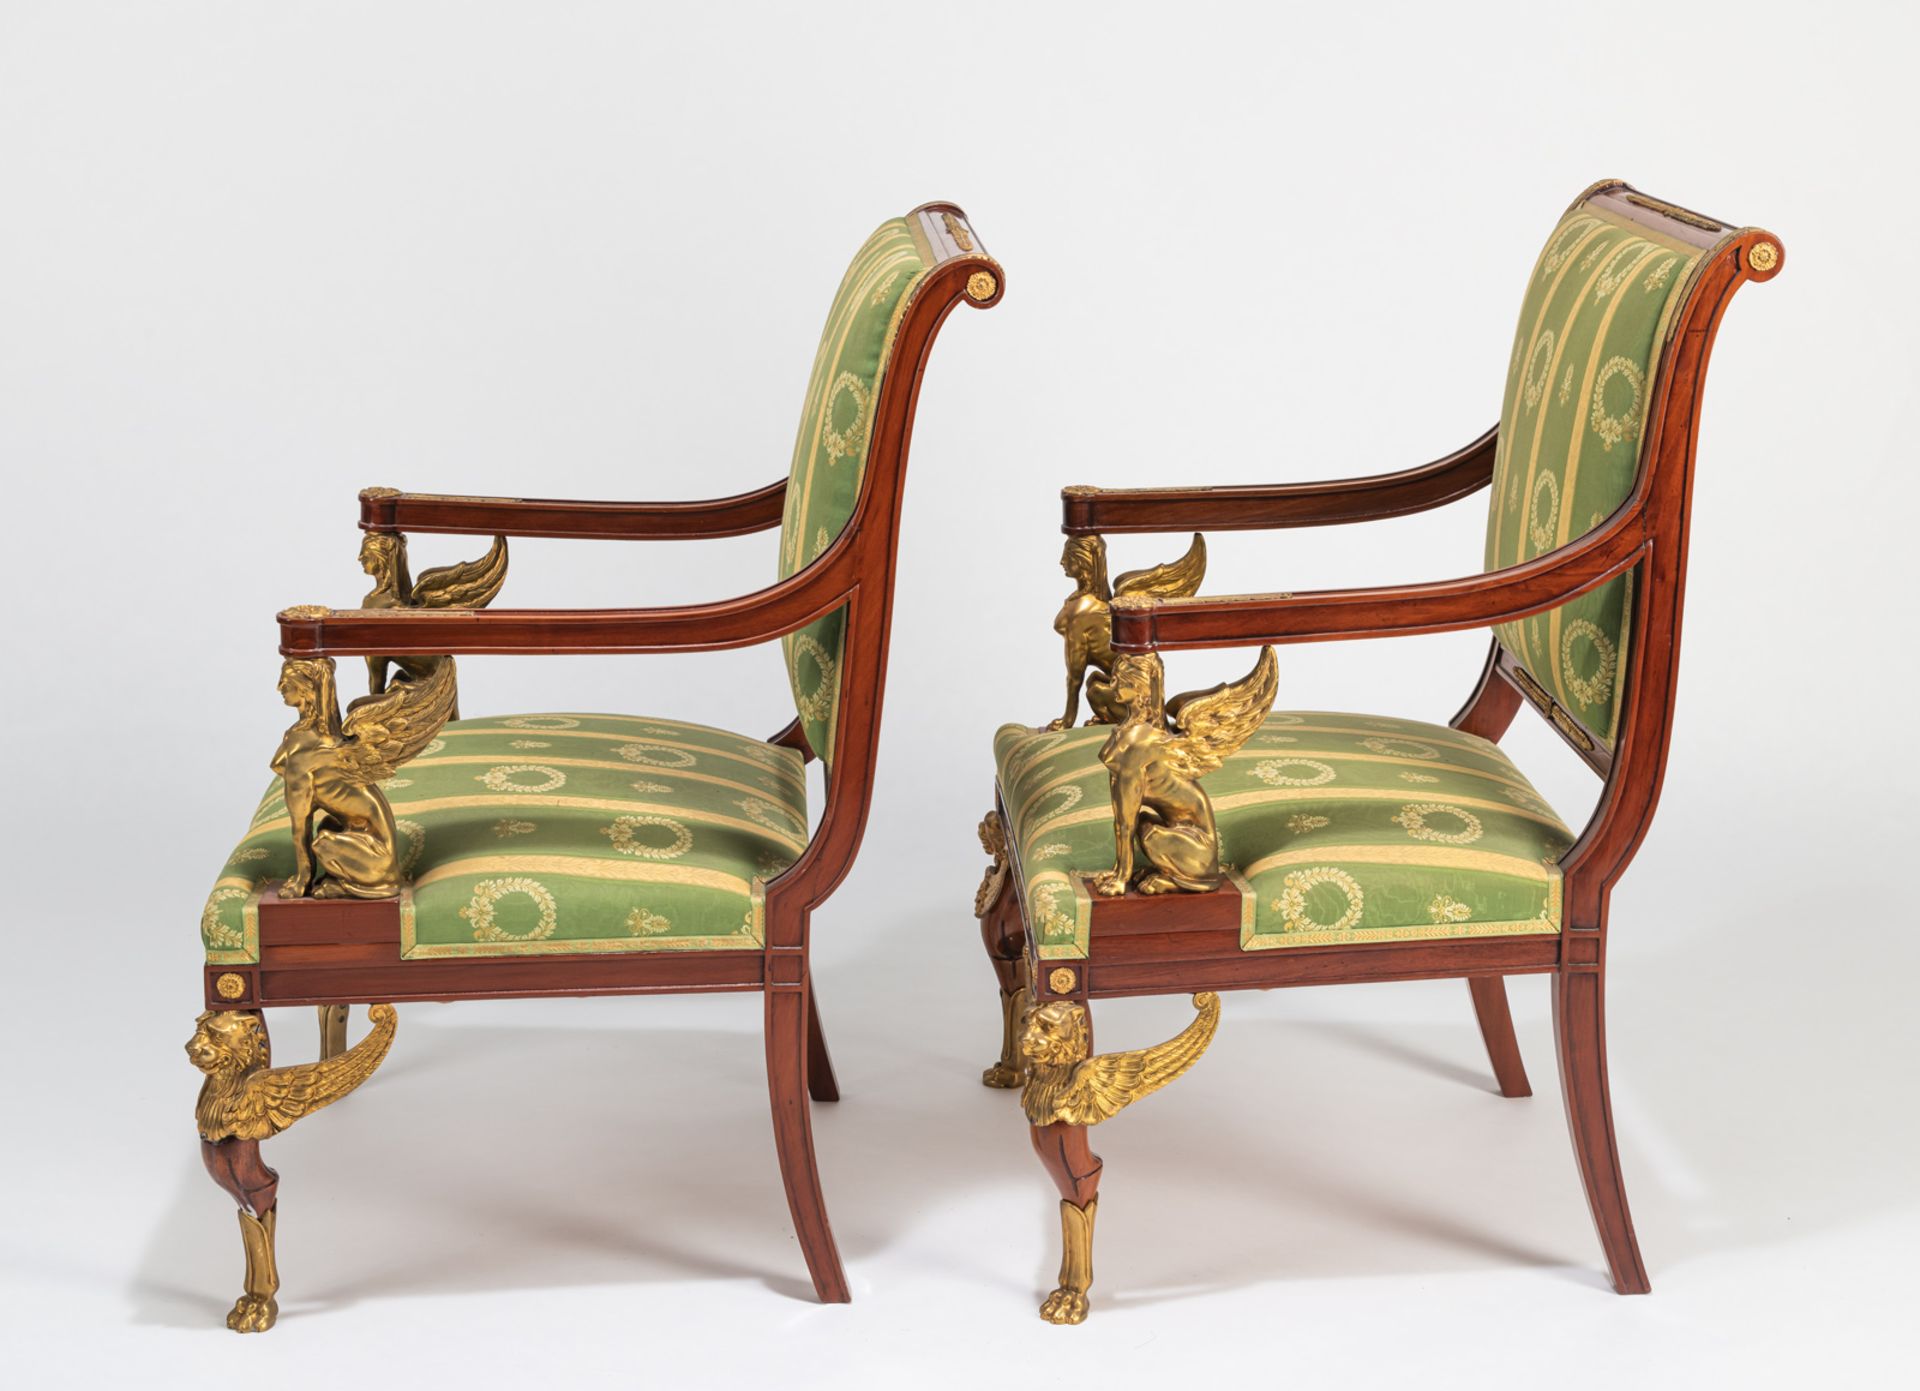 A PAIR OF NEOCLASSICAL ORMOLU MOUNTED MAHOGANY FAUTEUILS WITH SPHINX - Image 10 of 12